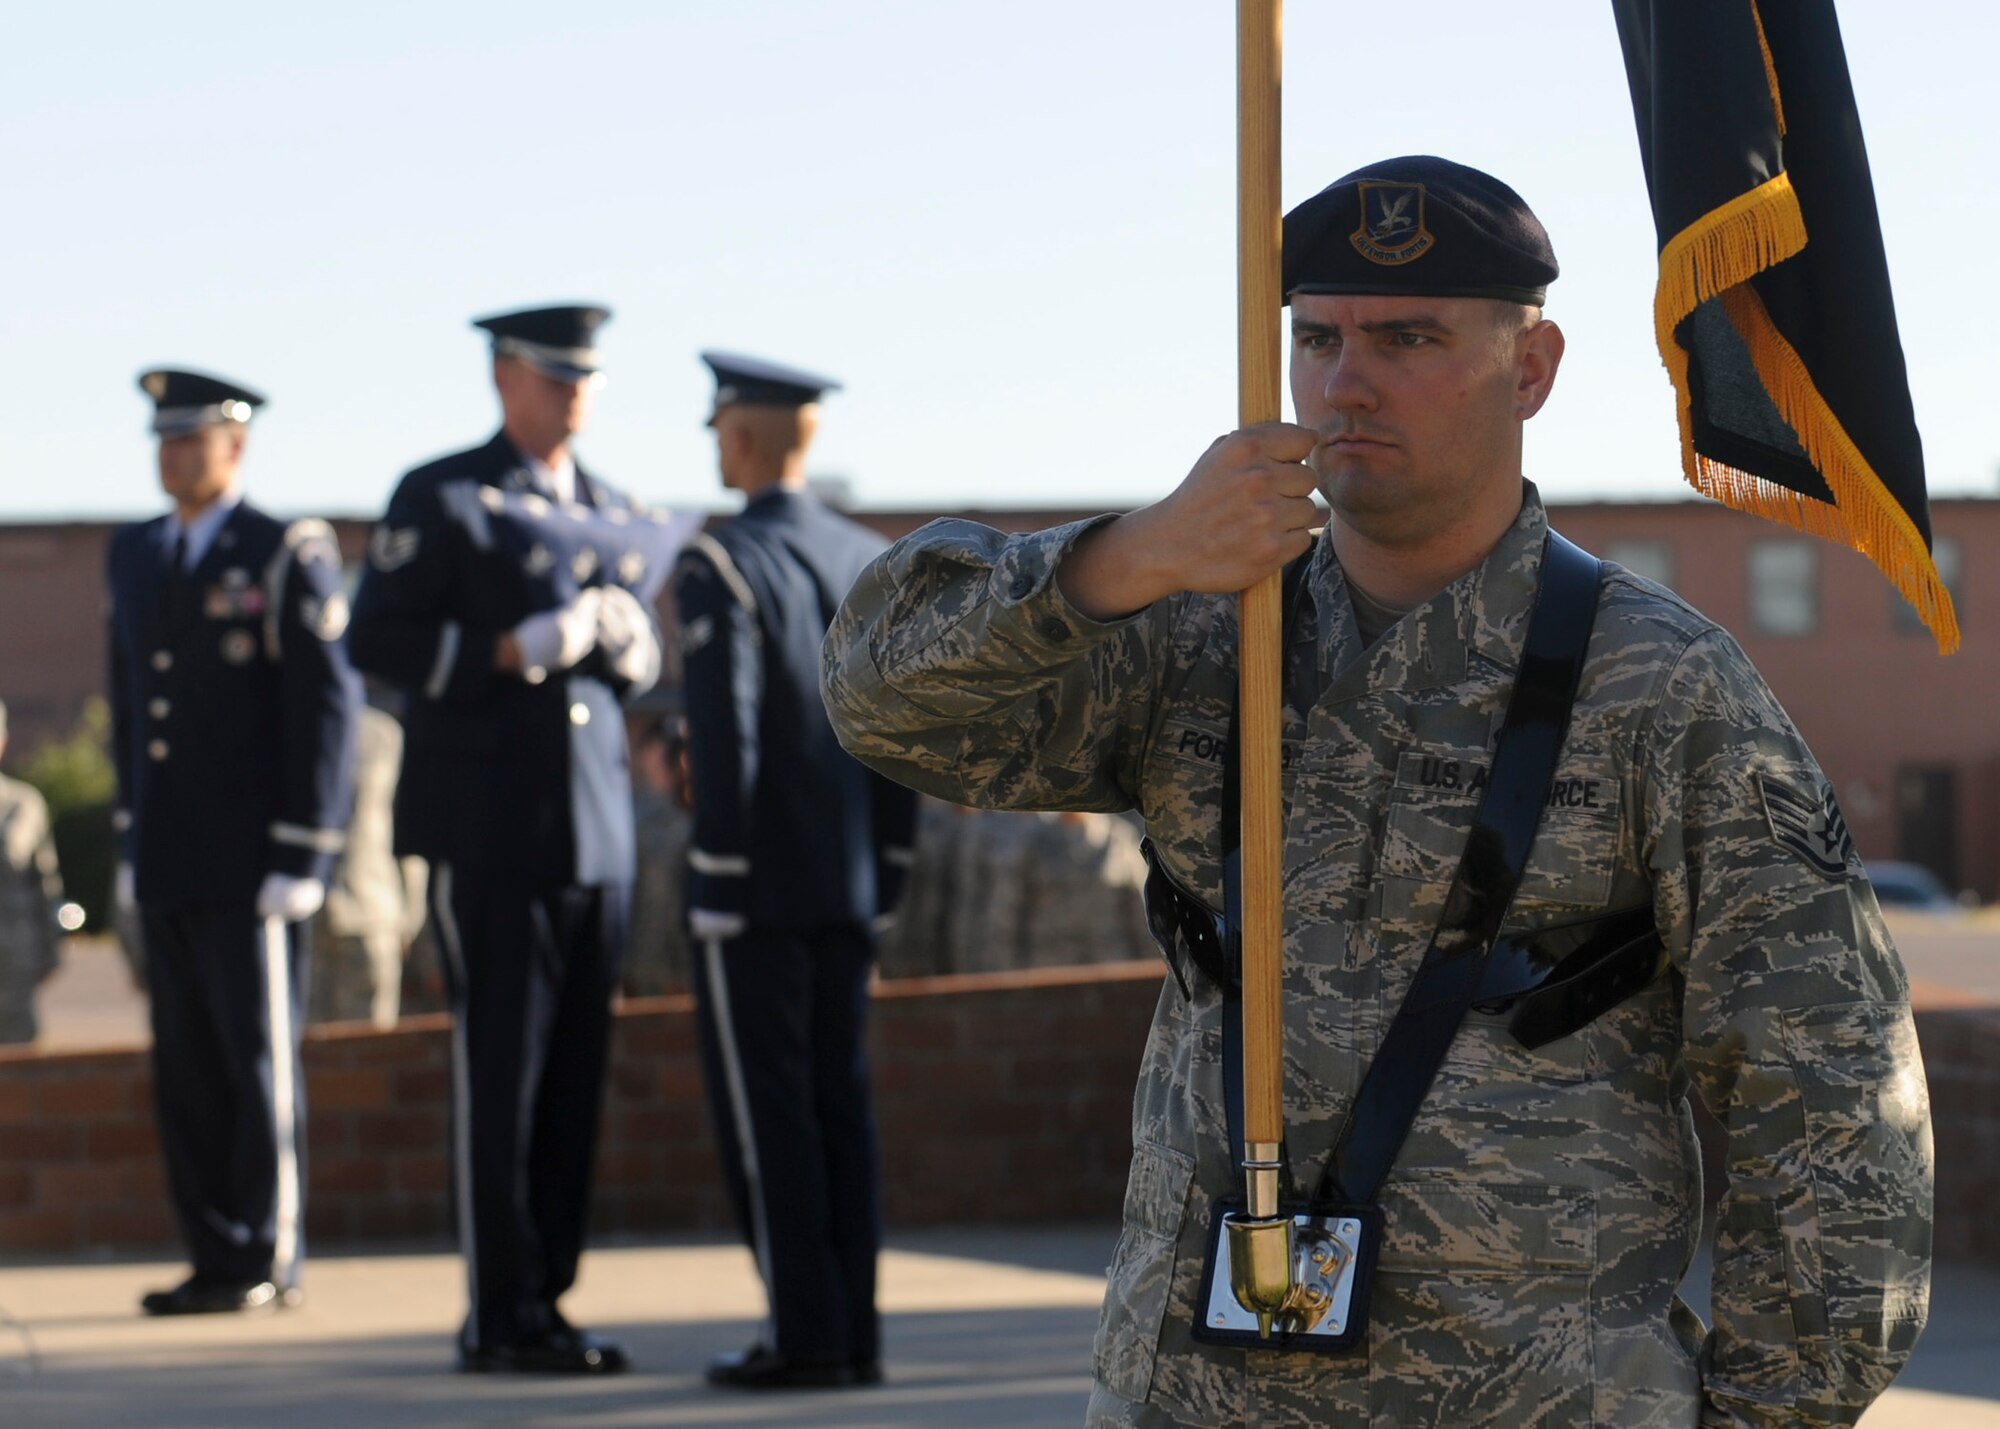 Staff Sgt. Wesley Forsberg, 28th Security Forces Squadron flight sergeant, stands post while holding a POW/MIA flag during a ceremony in front of the 28th Bomb Wing Headquarters at Ellsworth Air Force Base, S.D., Sept. 20, 2013. Several base events were held in conjunction with National POW/MIA Recognition Day including a 5k run and a barbecue. (U.S. Air Force photo by Airman 1st Class Anania Tekurio/Released)